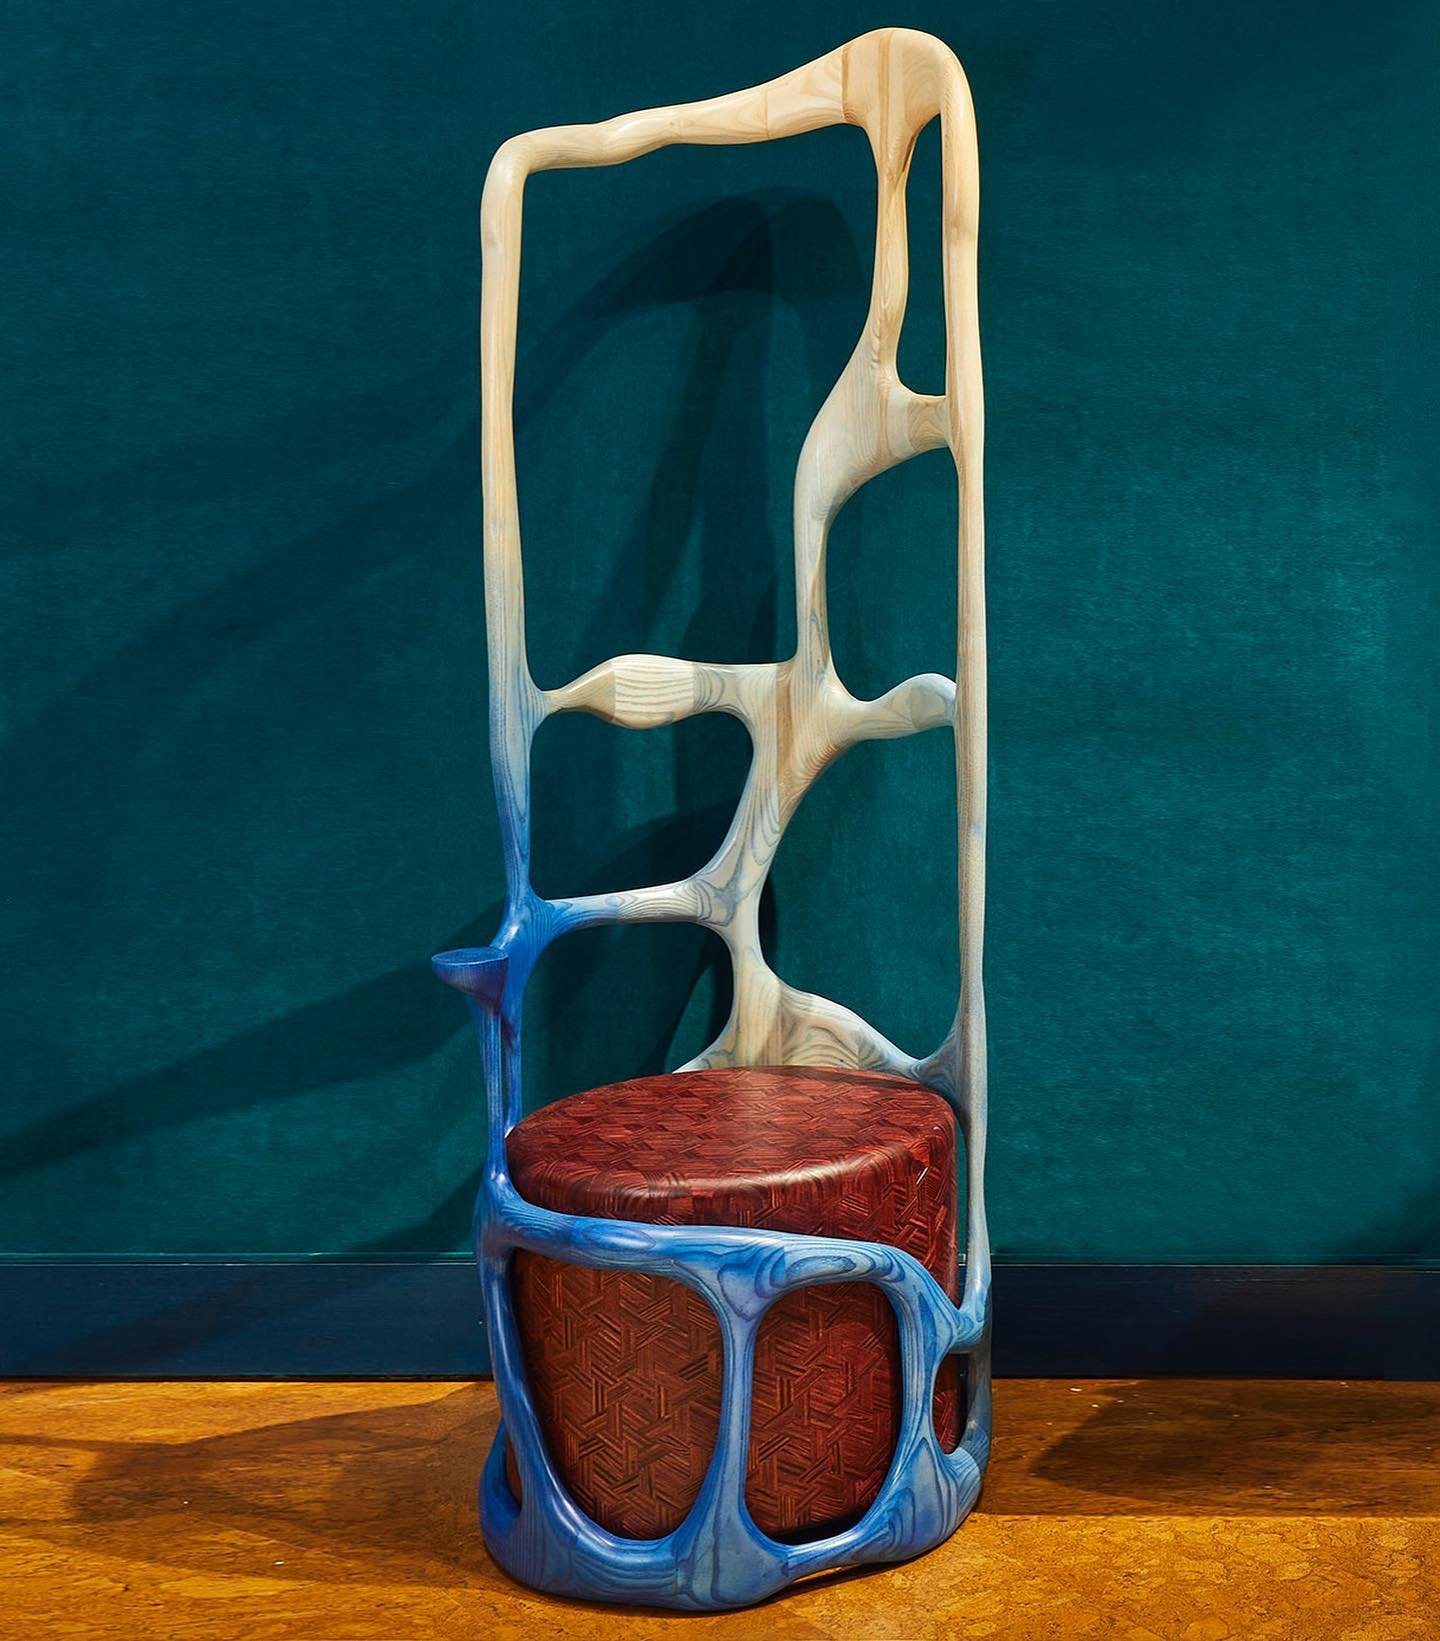 Nerikomi Ladderback Chair
On view @culture.object for Hyper-Materiality: a group exhibition exploring artistic practices that focus on the skillful manipulation of unusual materials with innovative processes